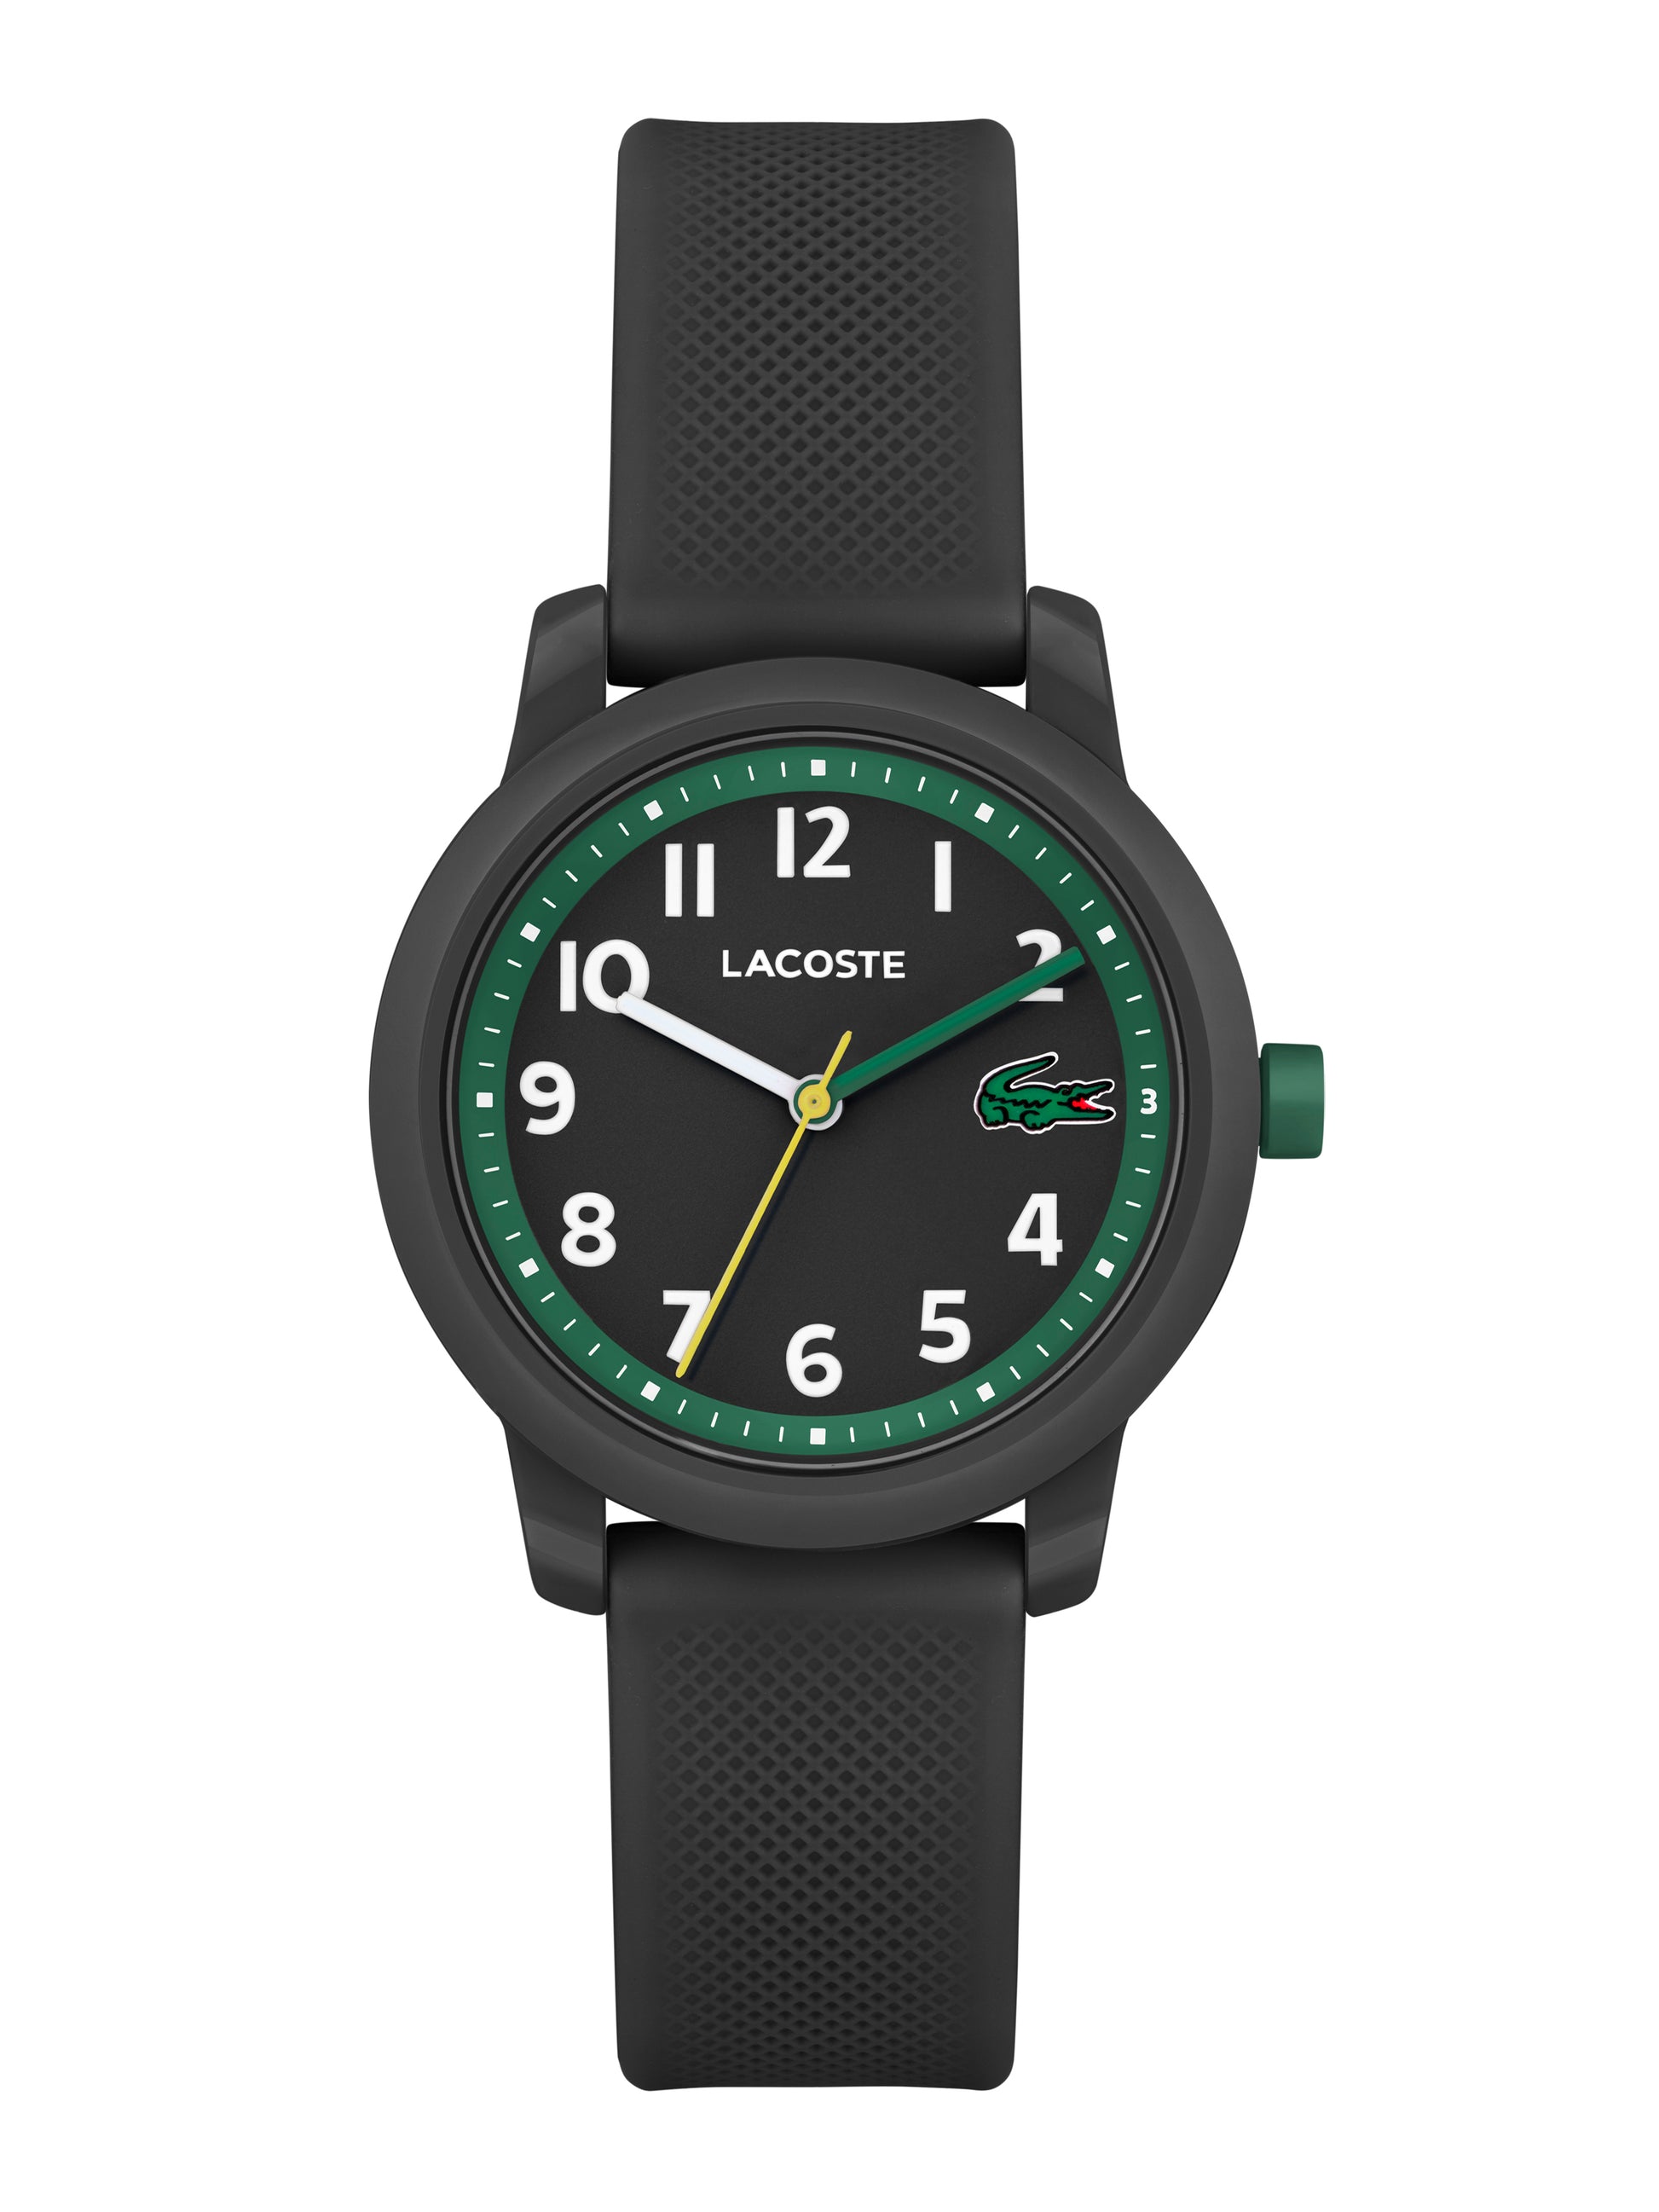 The Kids Lacoste.12.12 Black Watch 2030042 features a silicone band and is water resistance, showcased on a white background.